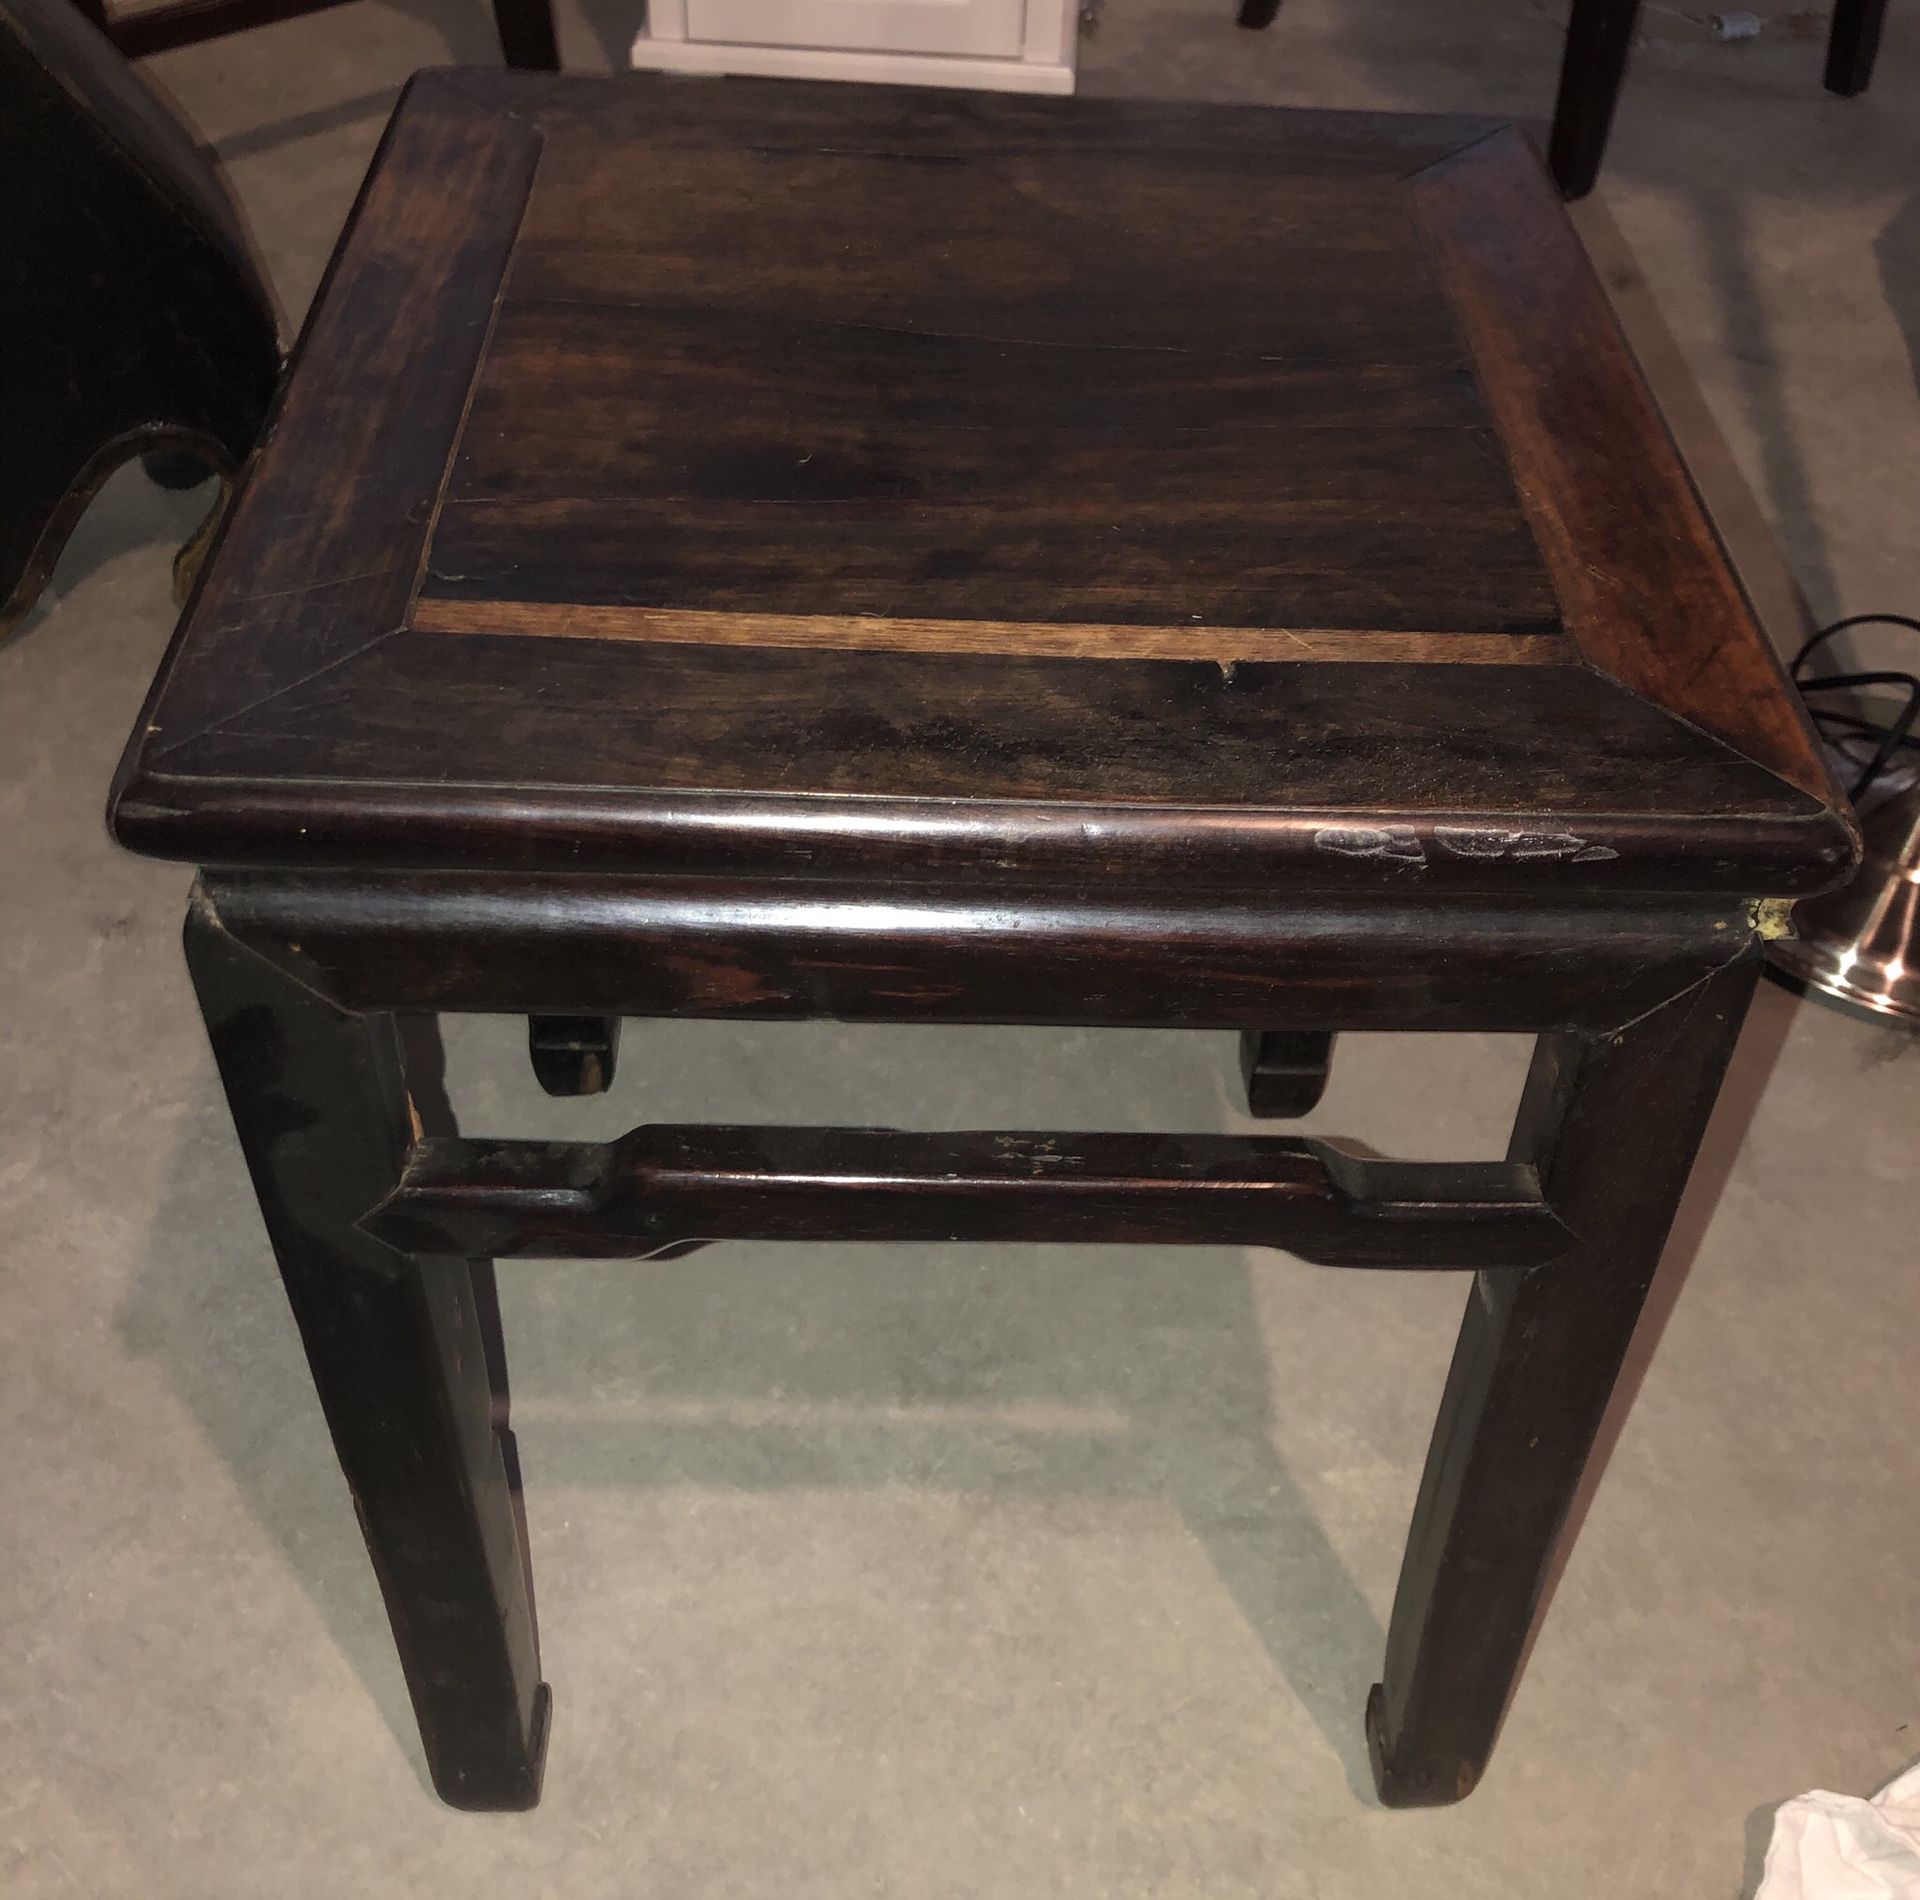 Vintage small end coffee table CHEAP wooden wood